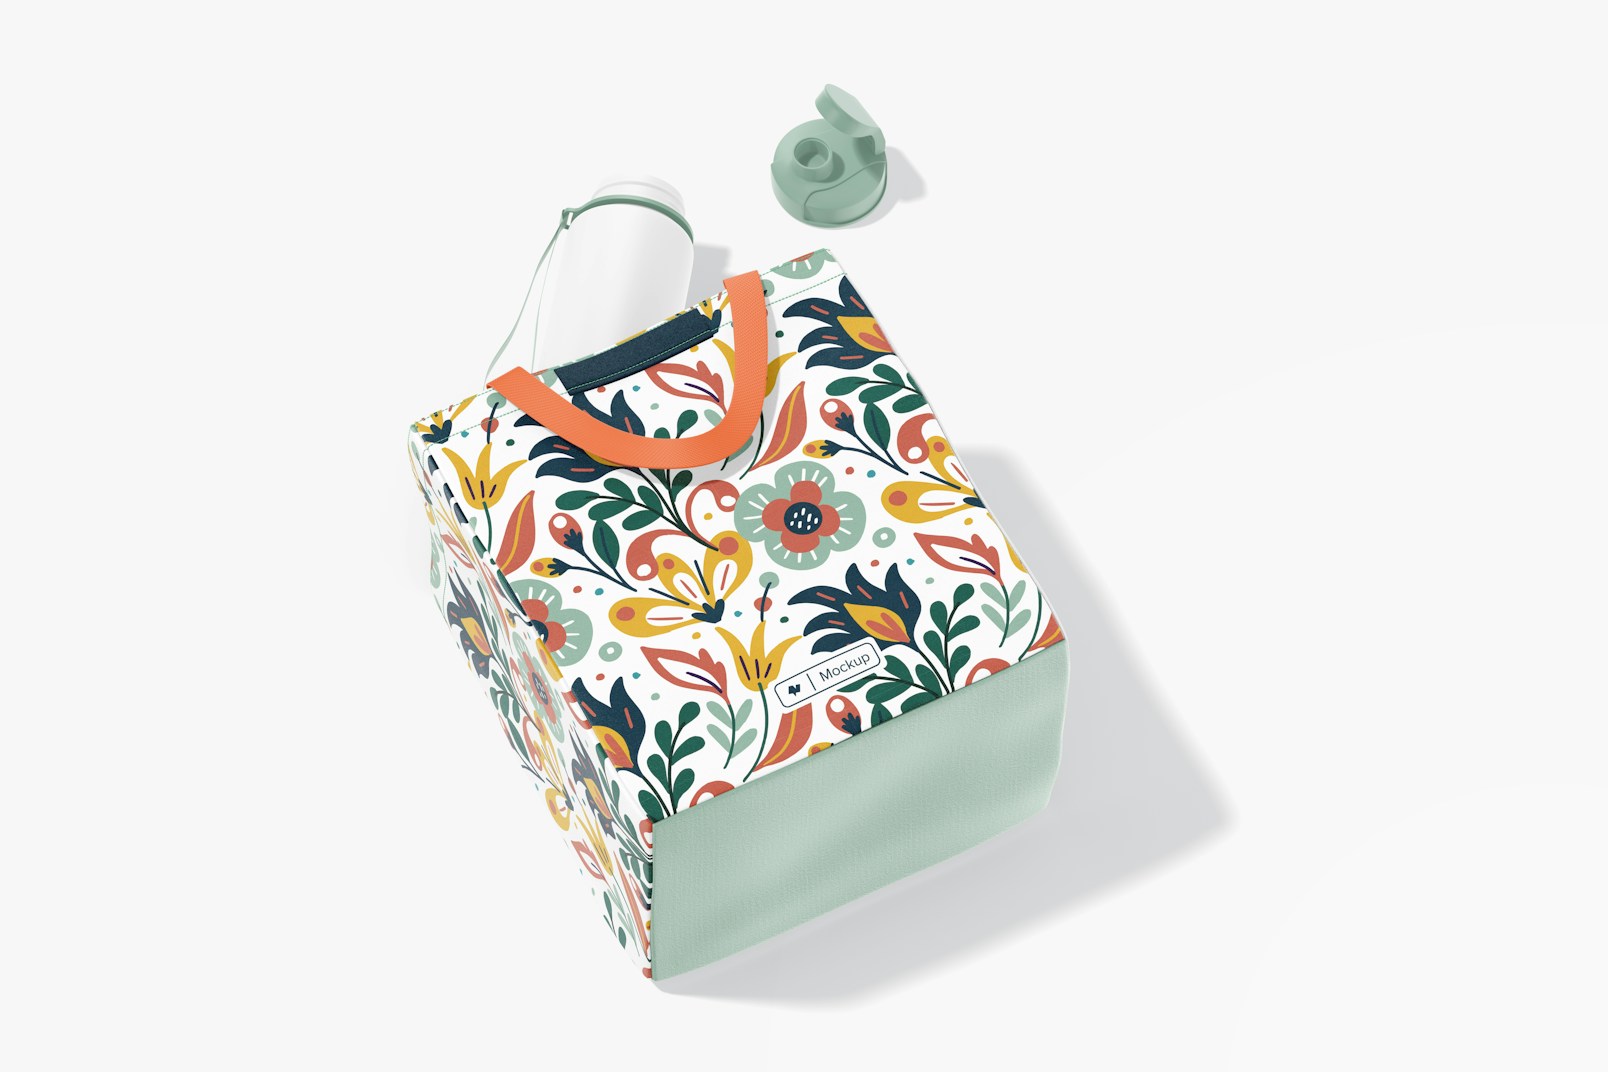 Foldable Lunch Bag Mockup, Perspective